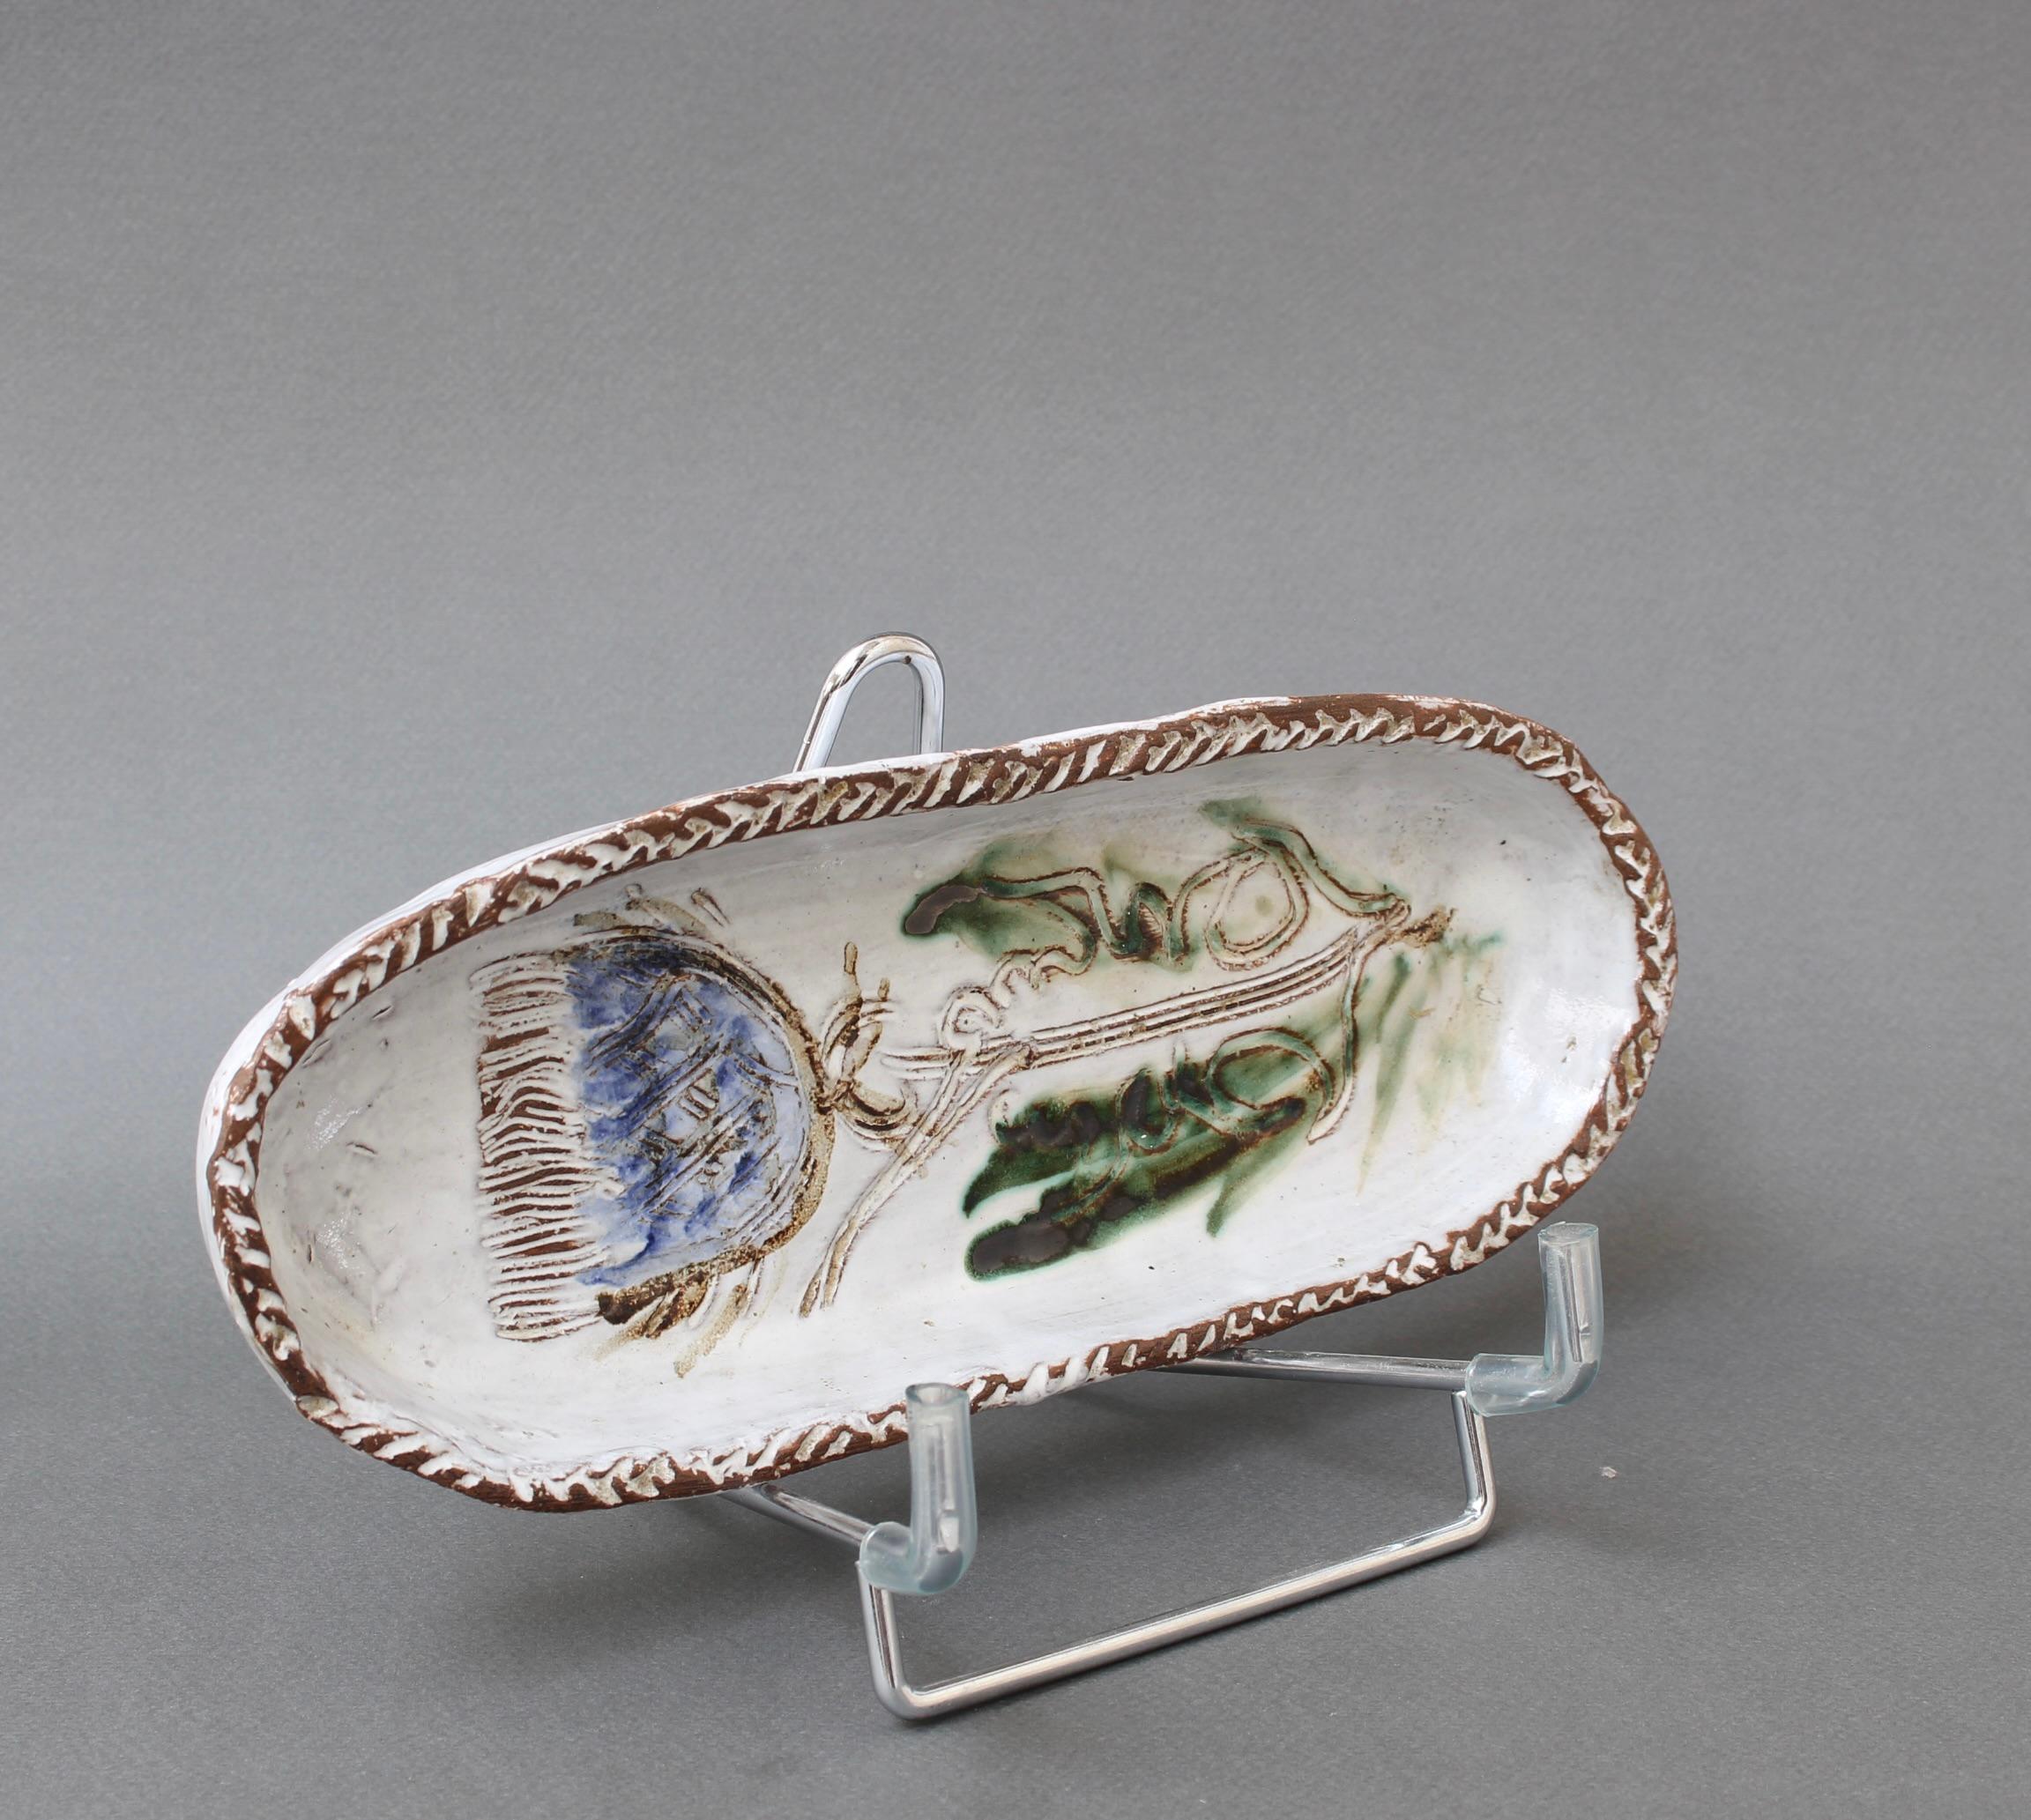 French ceramic decorative dish with flower motif (circa 1970s) by Albert Thiry. An oblong-shaped ceramic dish has a chalk-white glaze surface. Within the dish's recess, a thistle flower is incised into the glaze and painted in Thiry's trademark